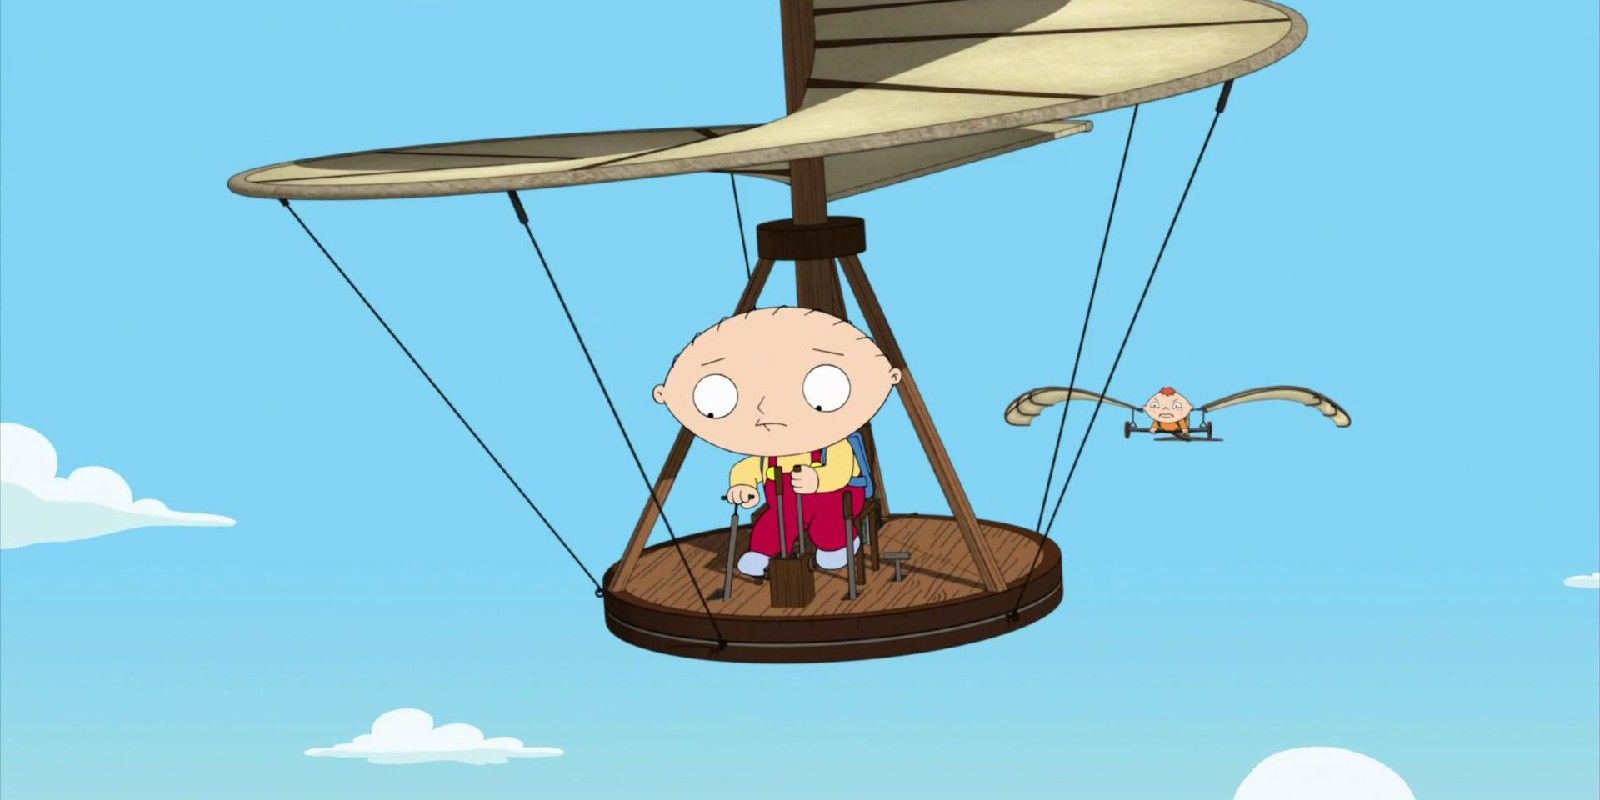 Stewie in a flying contraption in Family Guy.